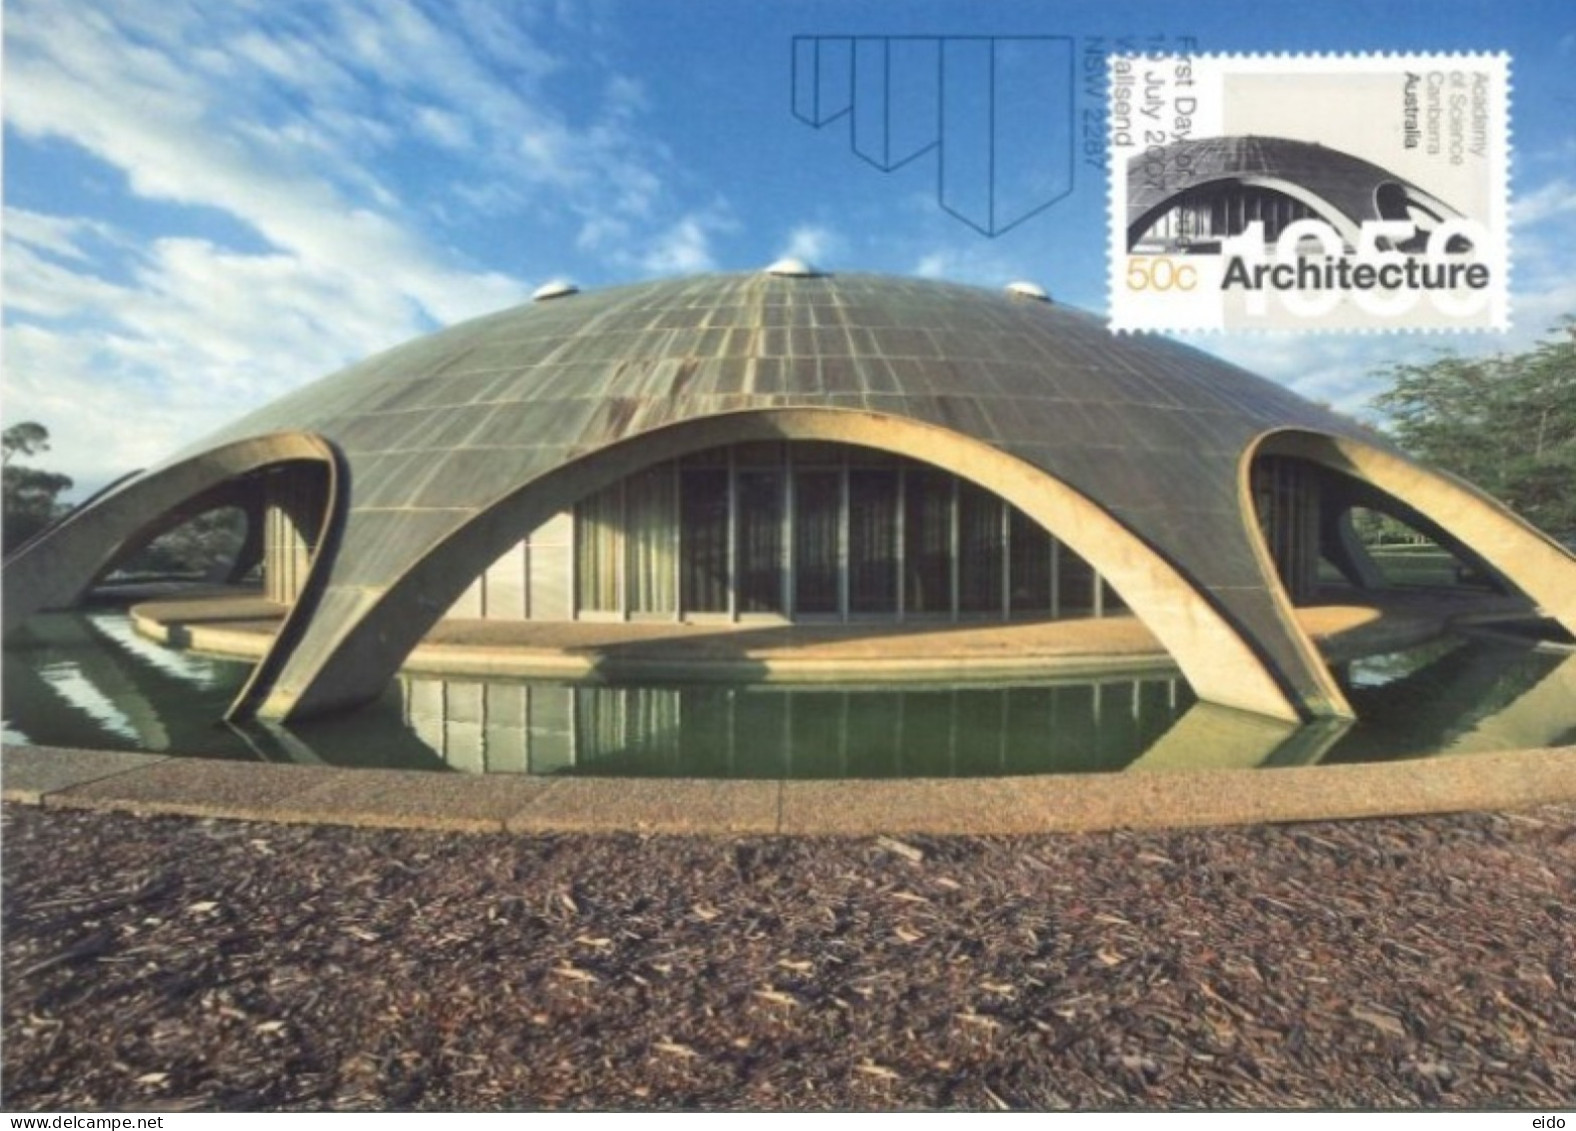 AUSTRALIA  : 2007, POSTAGE PRE PAID POSTCARD OF AUSTRALIAN ARCHITECTURE WITH FD OF ISSUE STAMP. - Covers & Documents